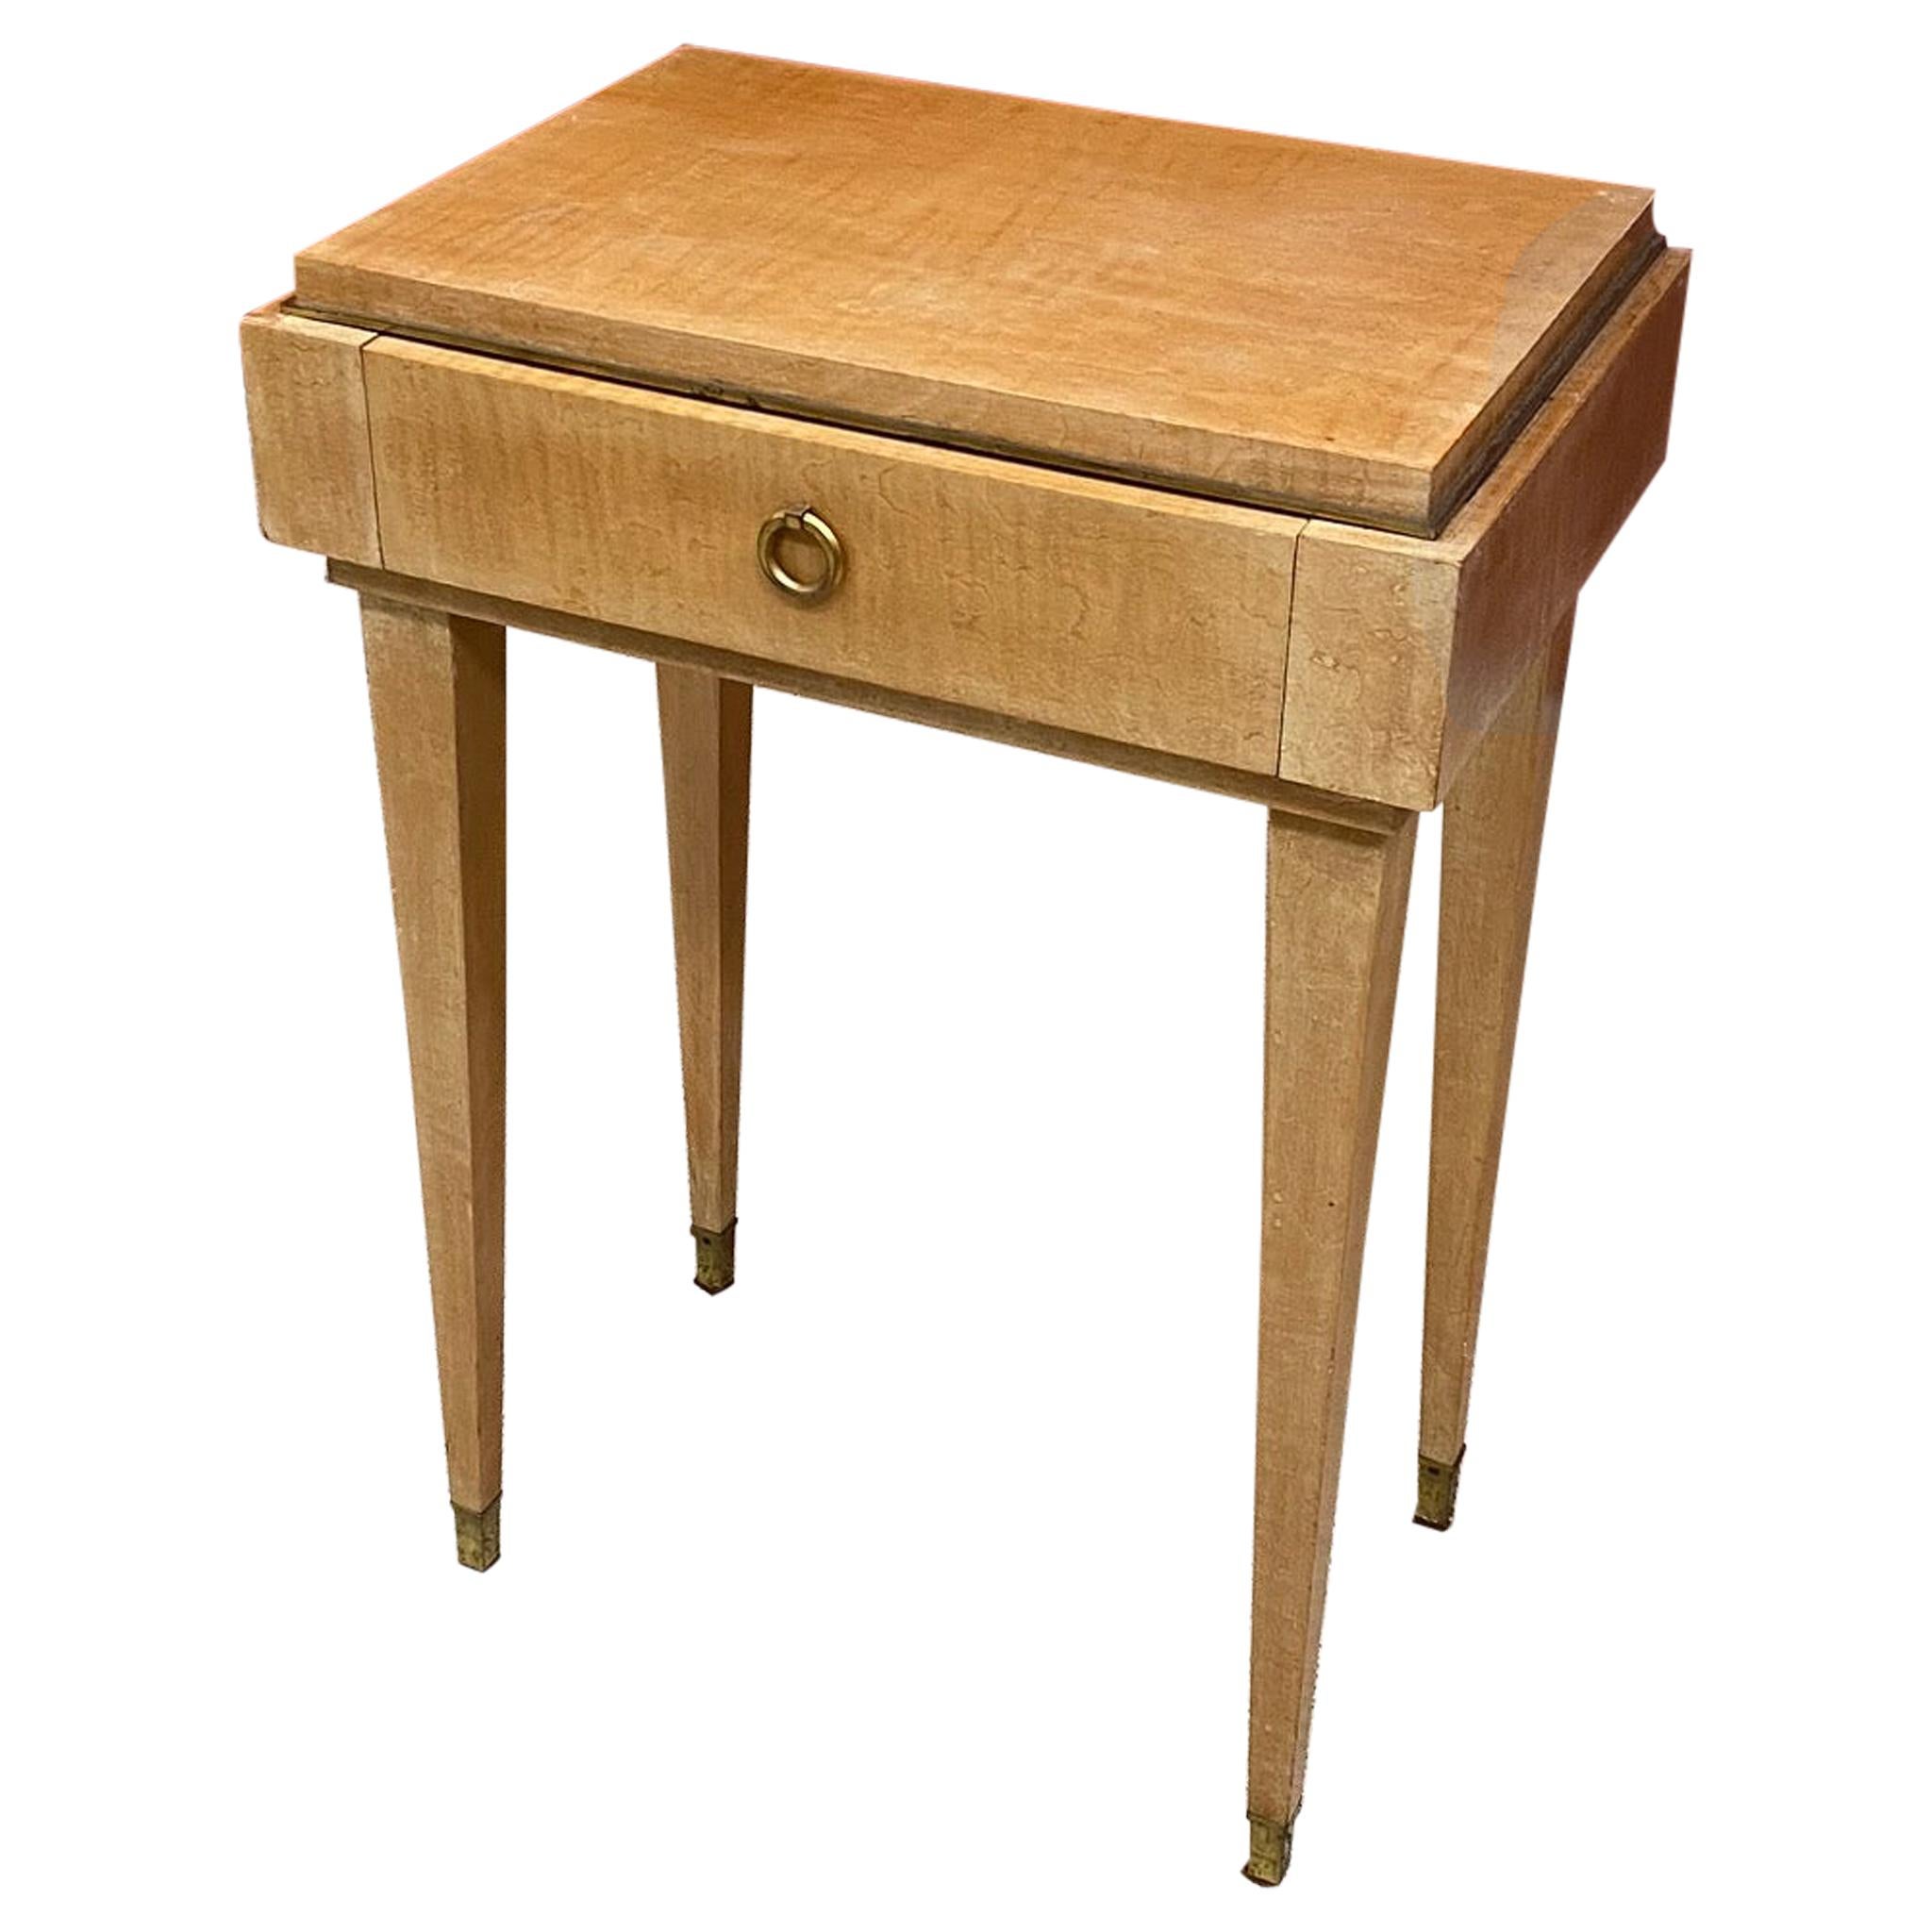 André Beaudoin, Art Deco Nightstand in Sycamore and Bronze, circa 1940-1950